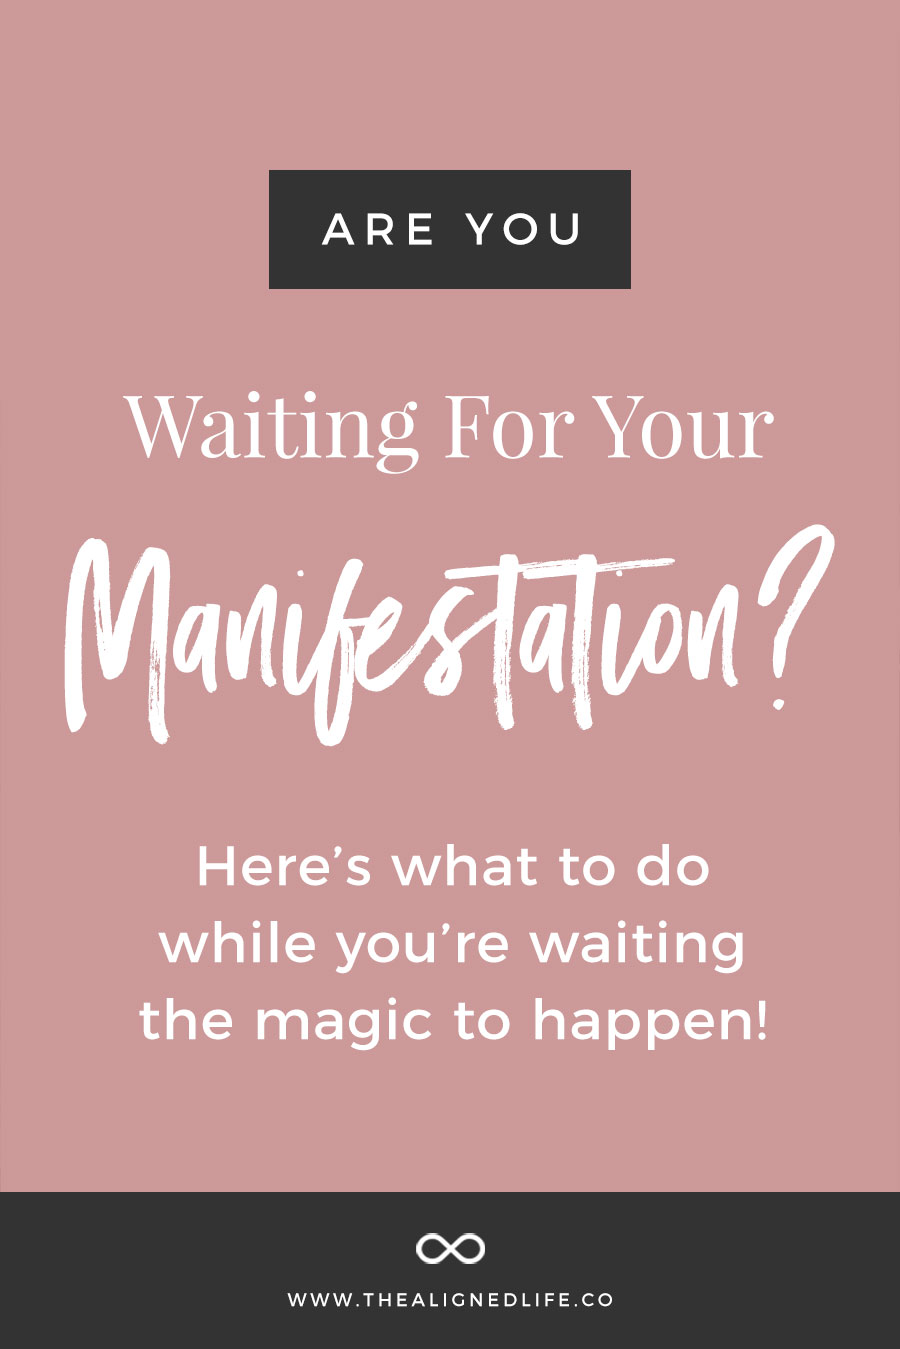 Are You Waiting For Your Manifestation? Here's What To Do